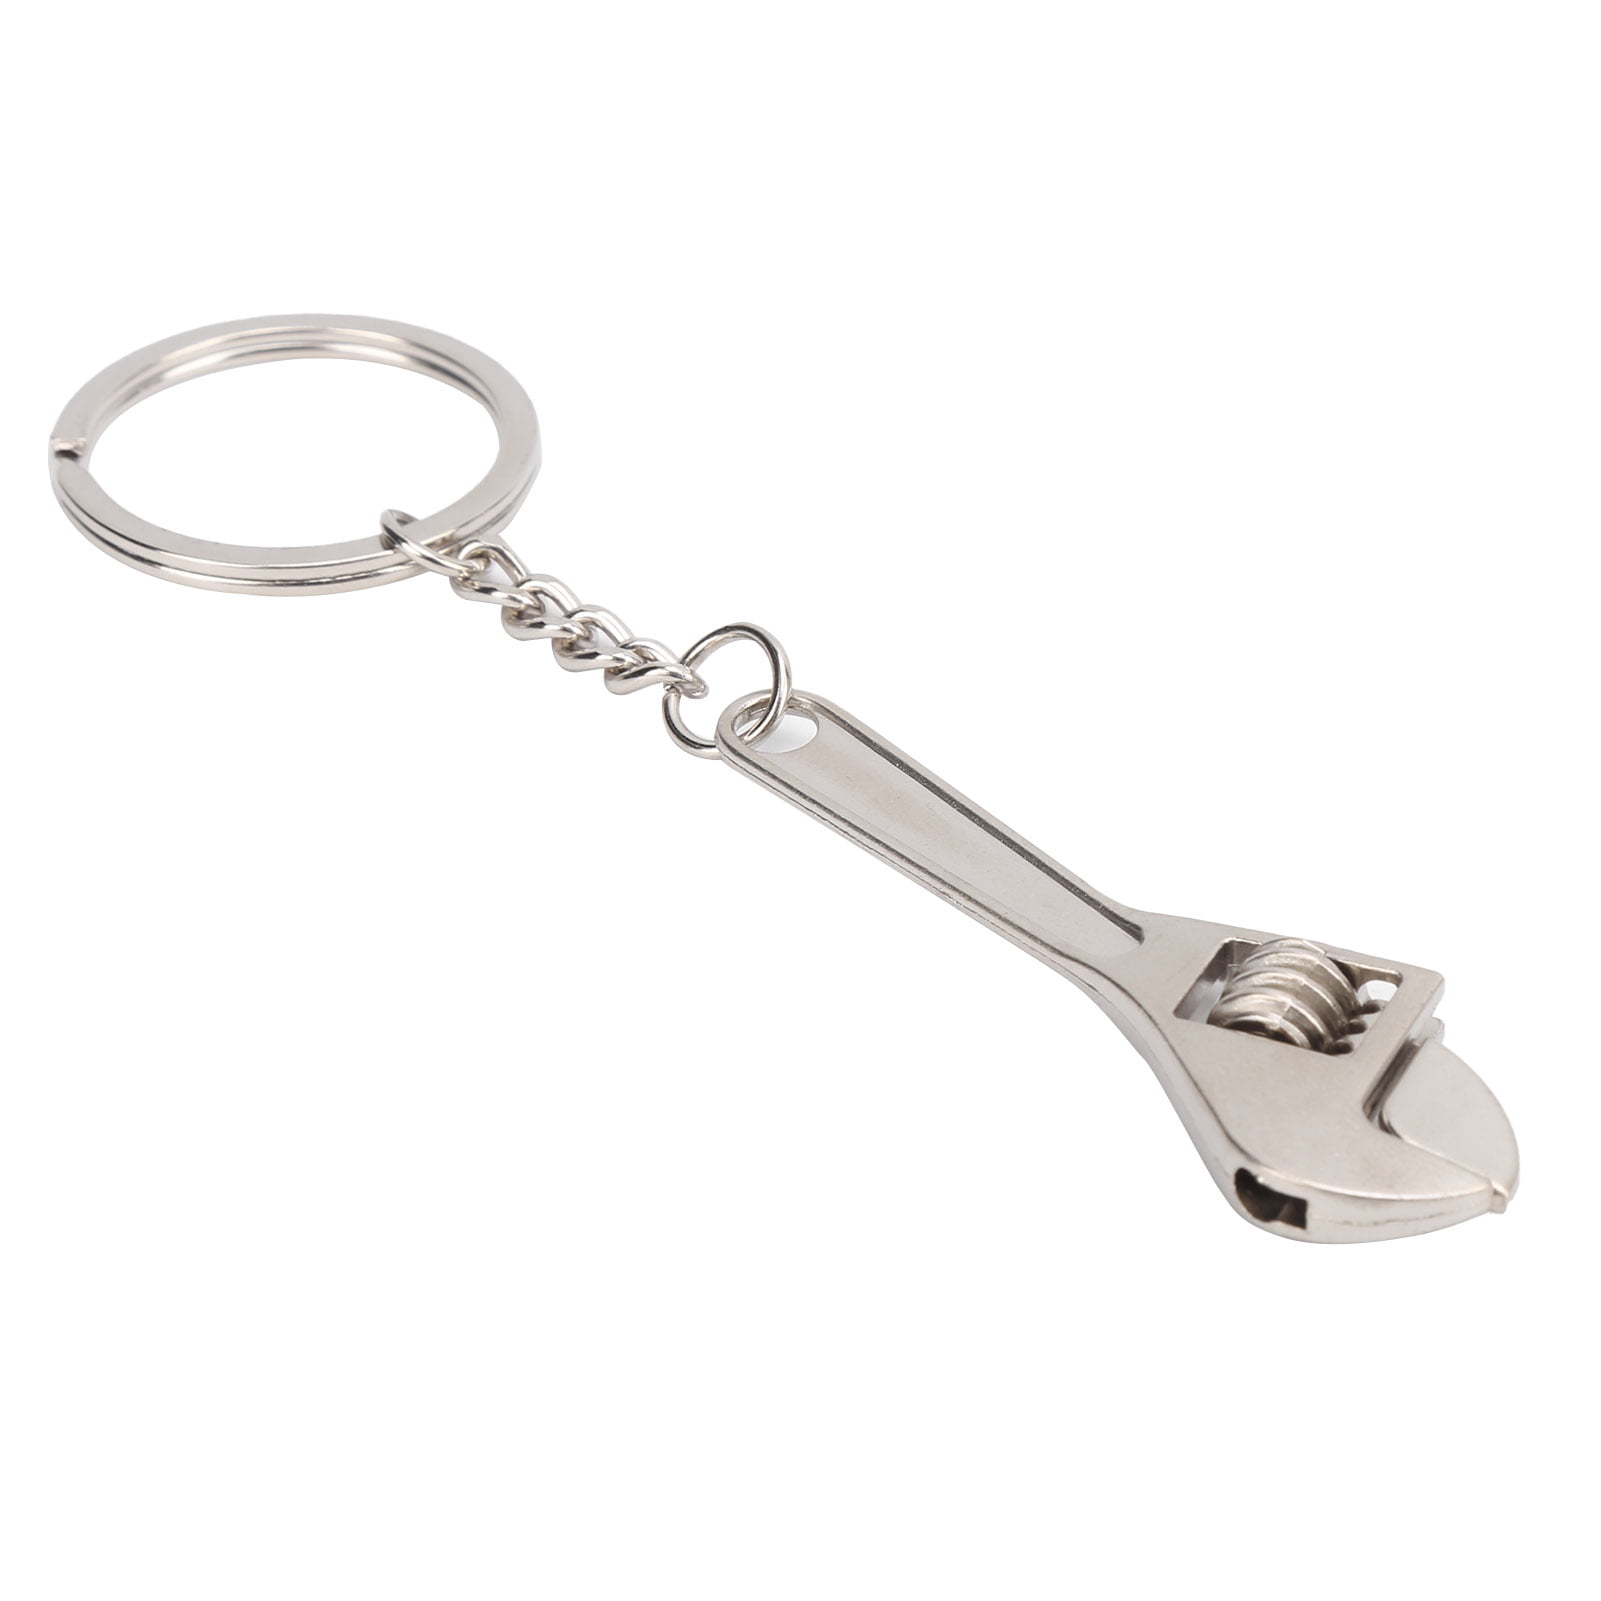 Portable Adjustable Wrench Keychain Wit Chain Decoration for Removing Small Part 